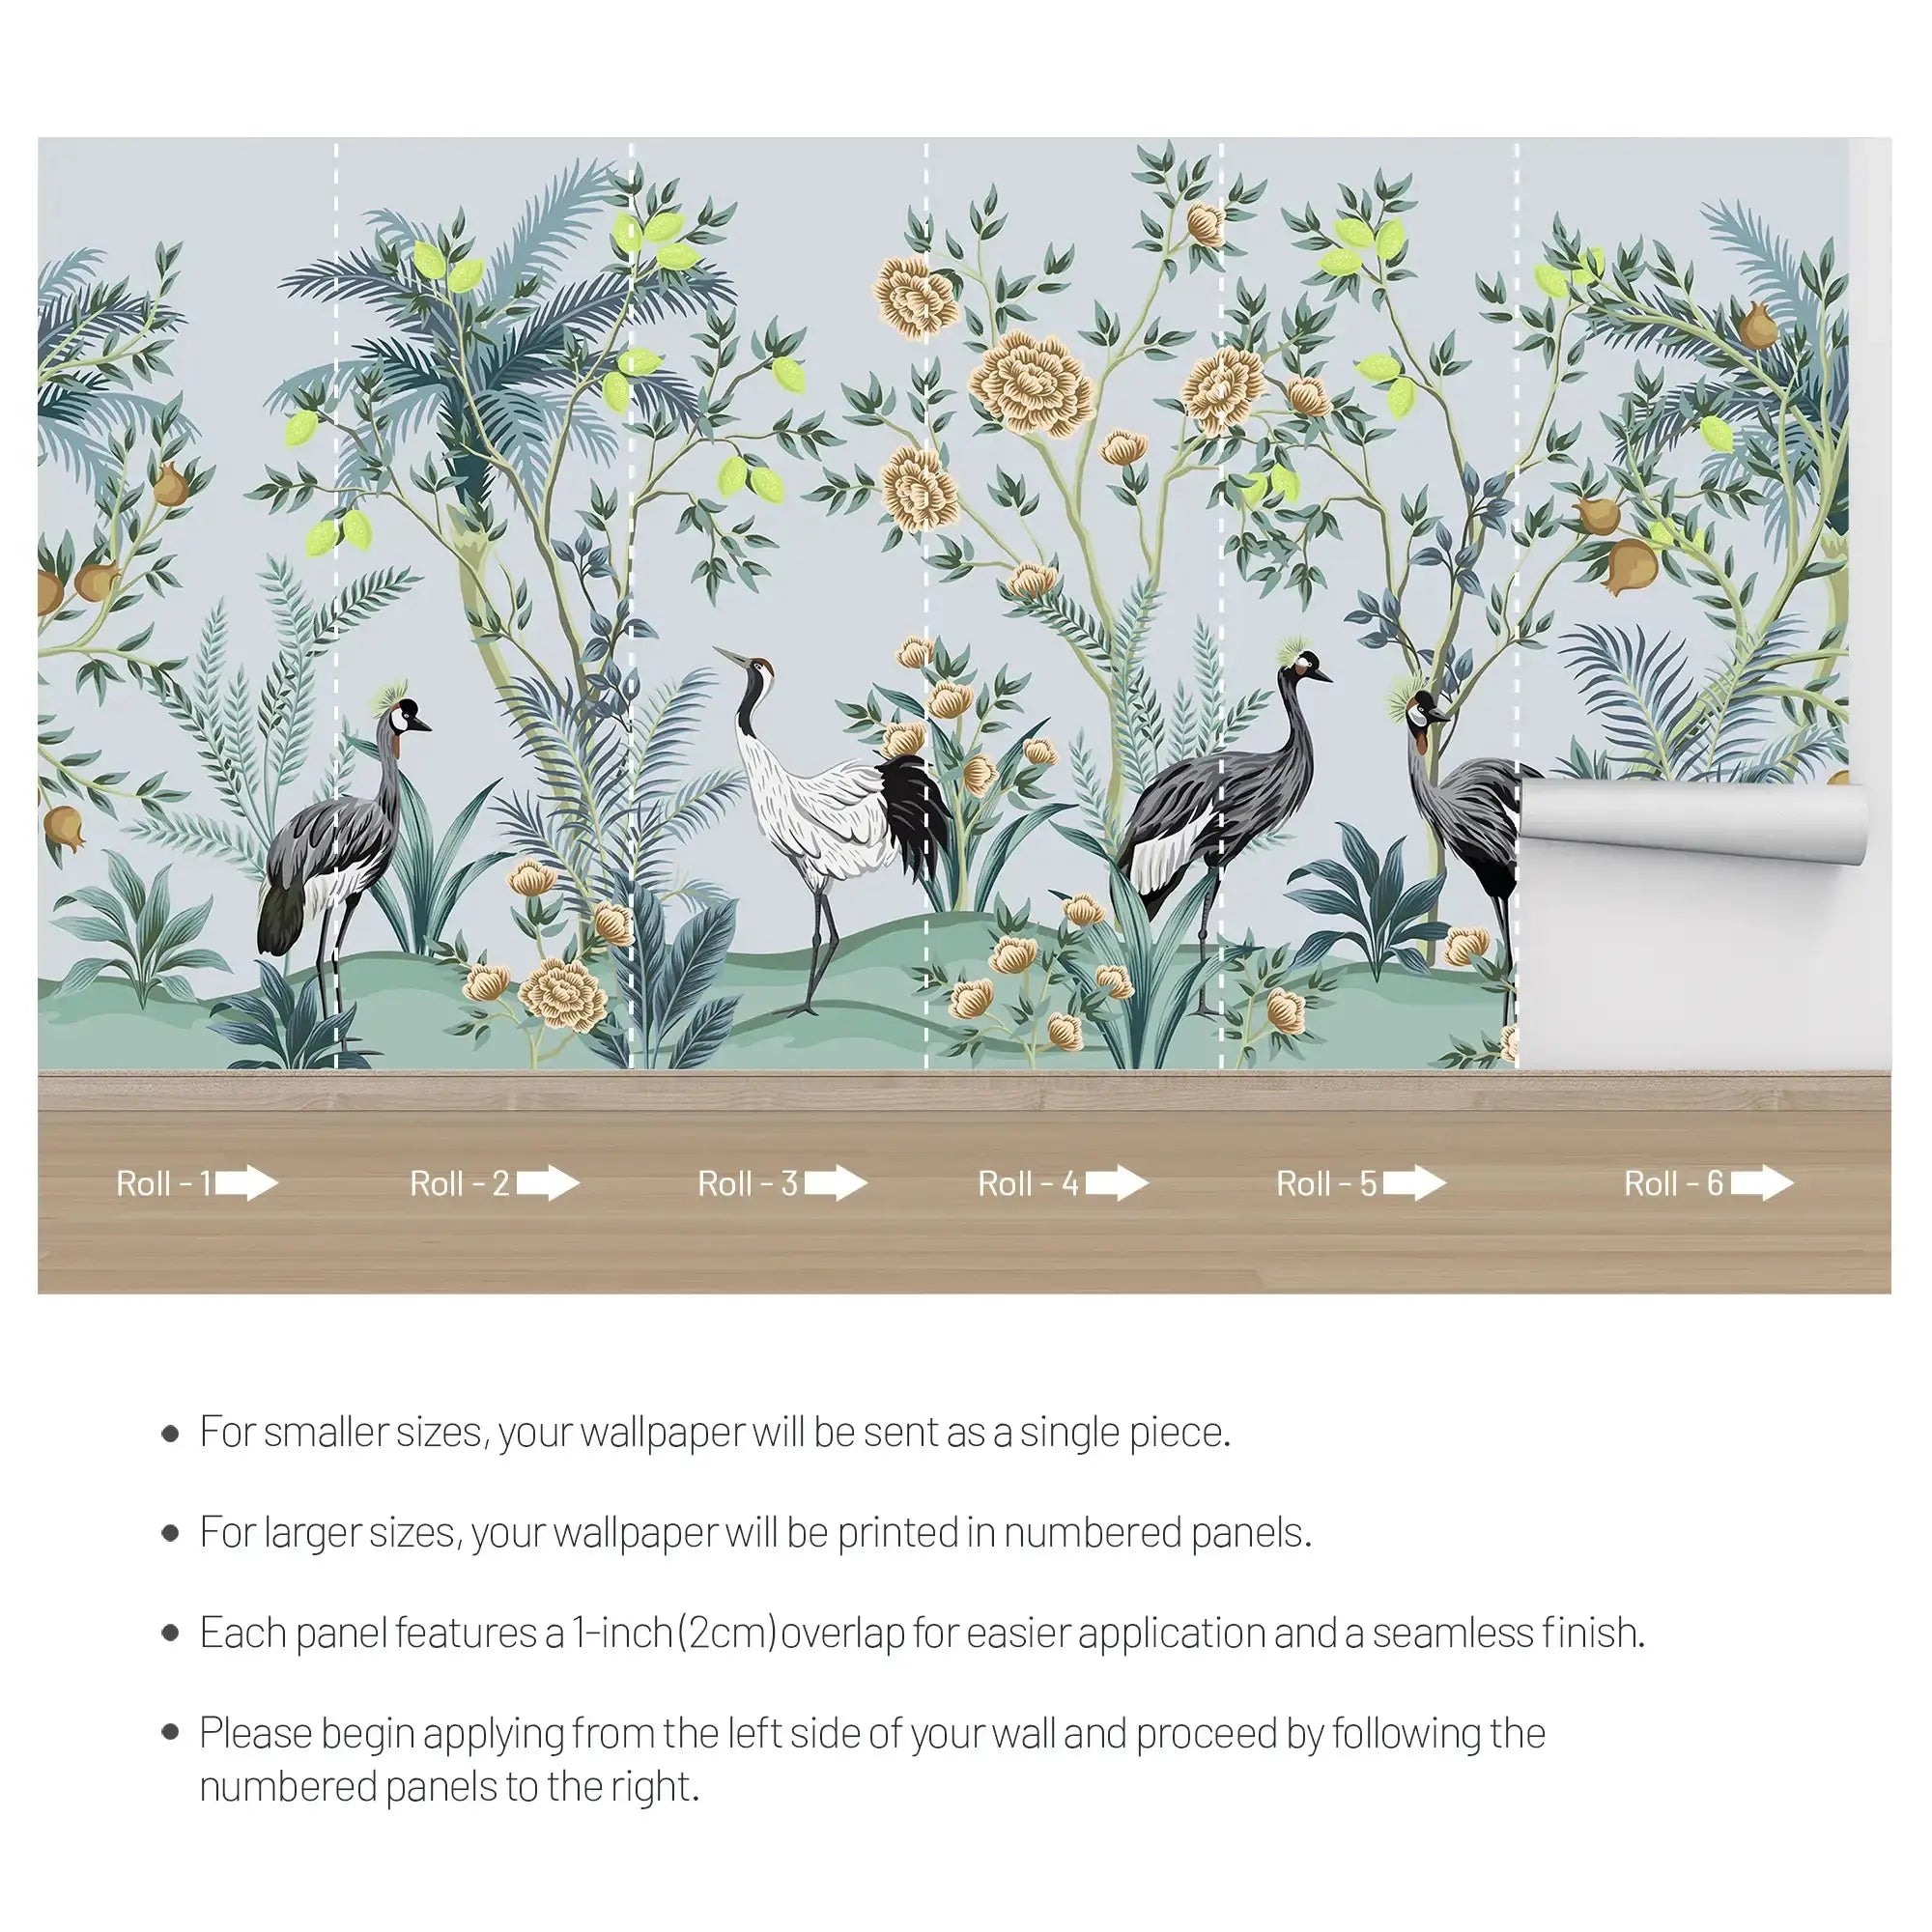 3107-C / Peelable Asian Wallpaper - Oriental Style with Cranes and Flowers - Easy Install Wall Mural - Artevella